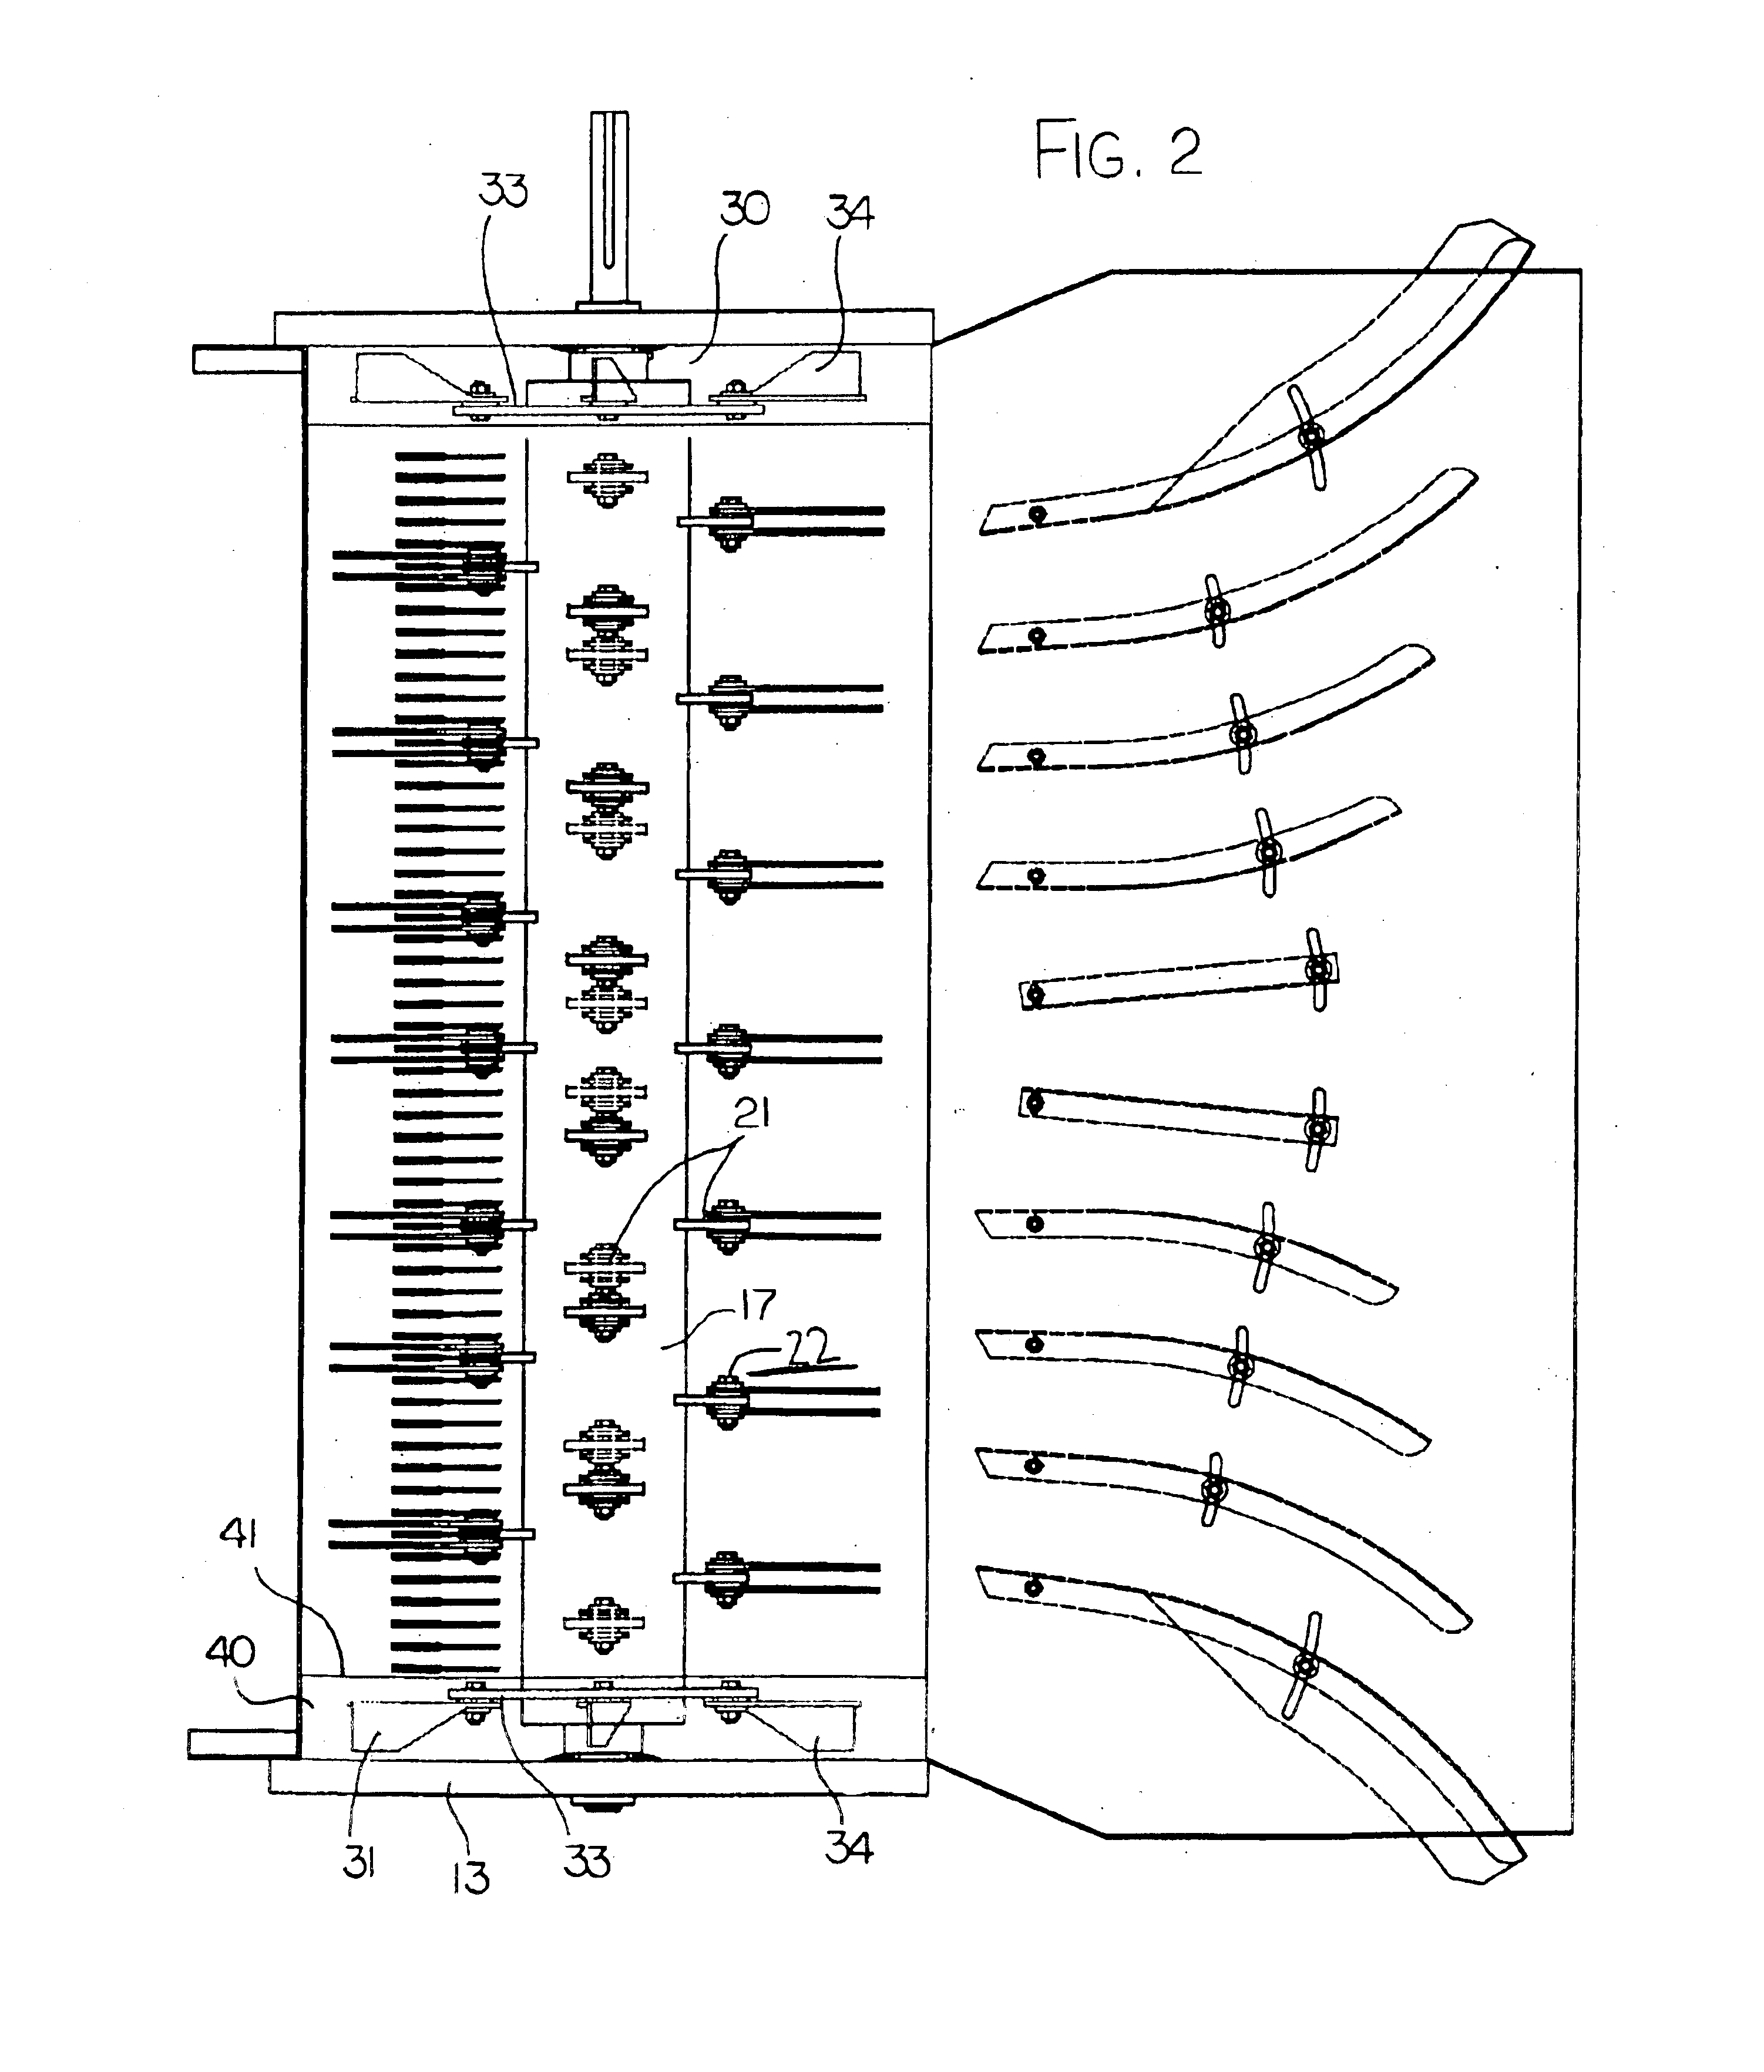 Apparatus for chopping and discharging straw from a combine harvester